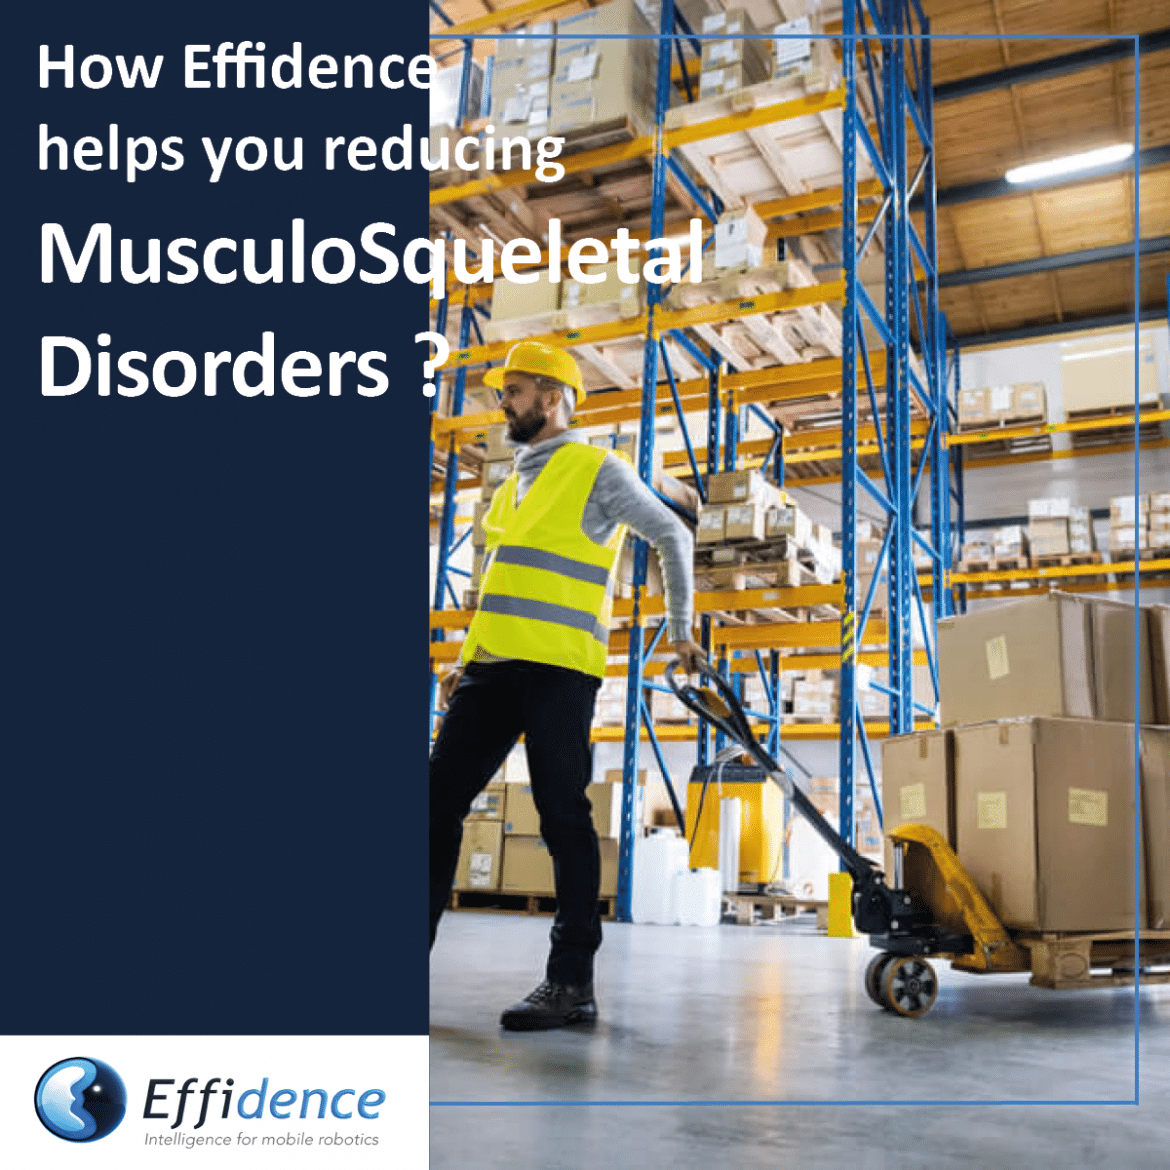 Effidence, reduction of musculoskeletal disorders